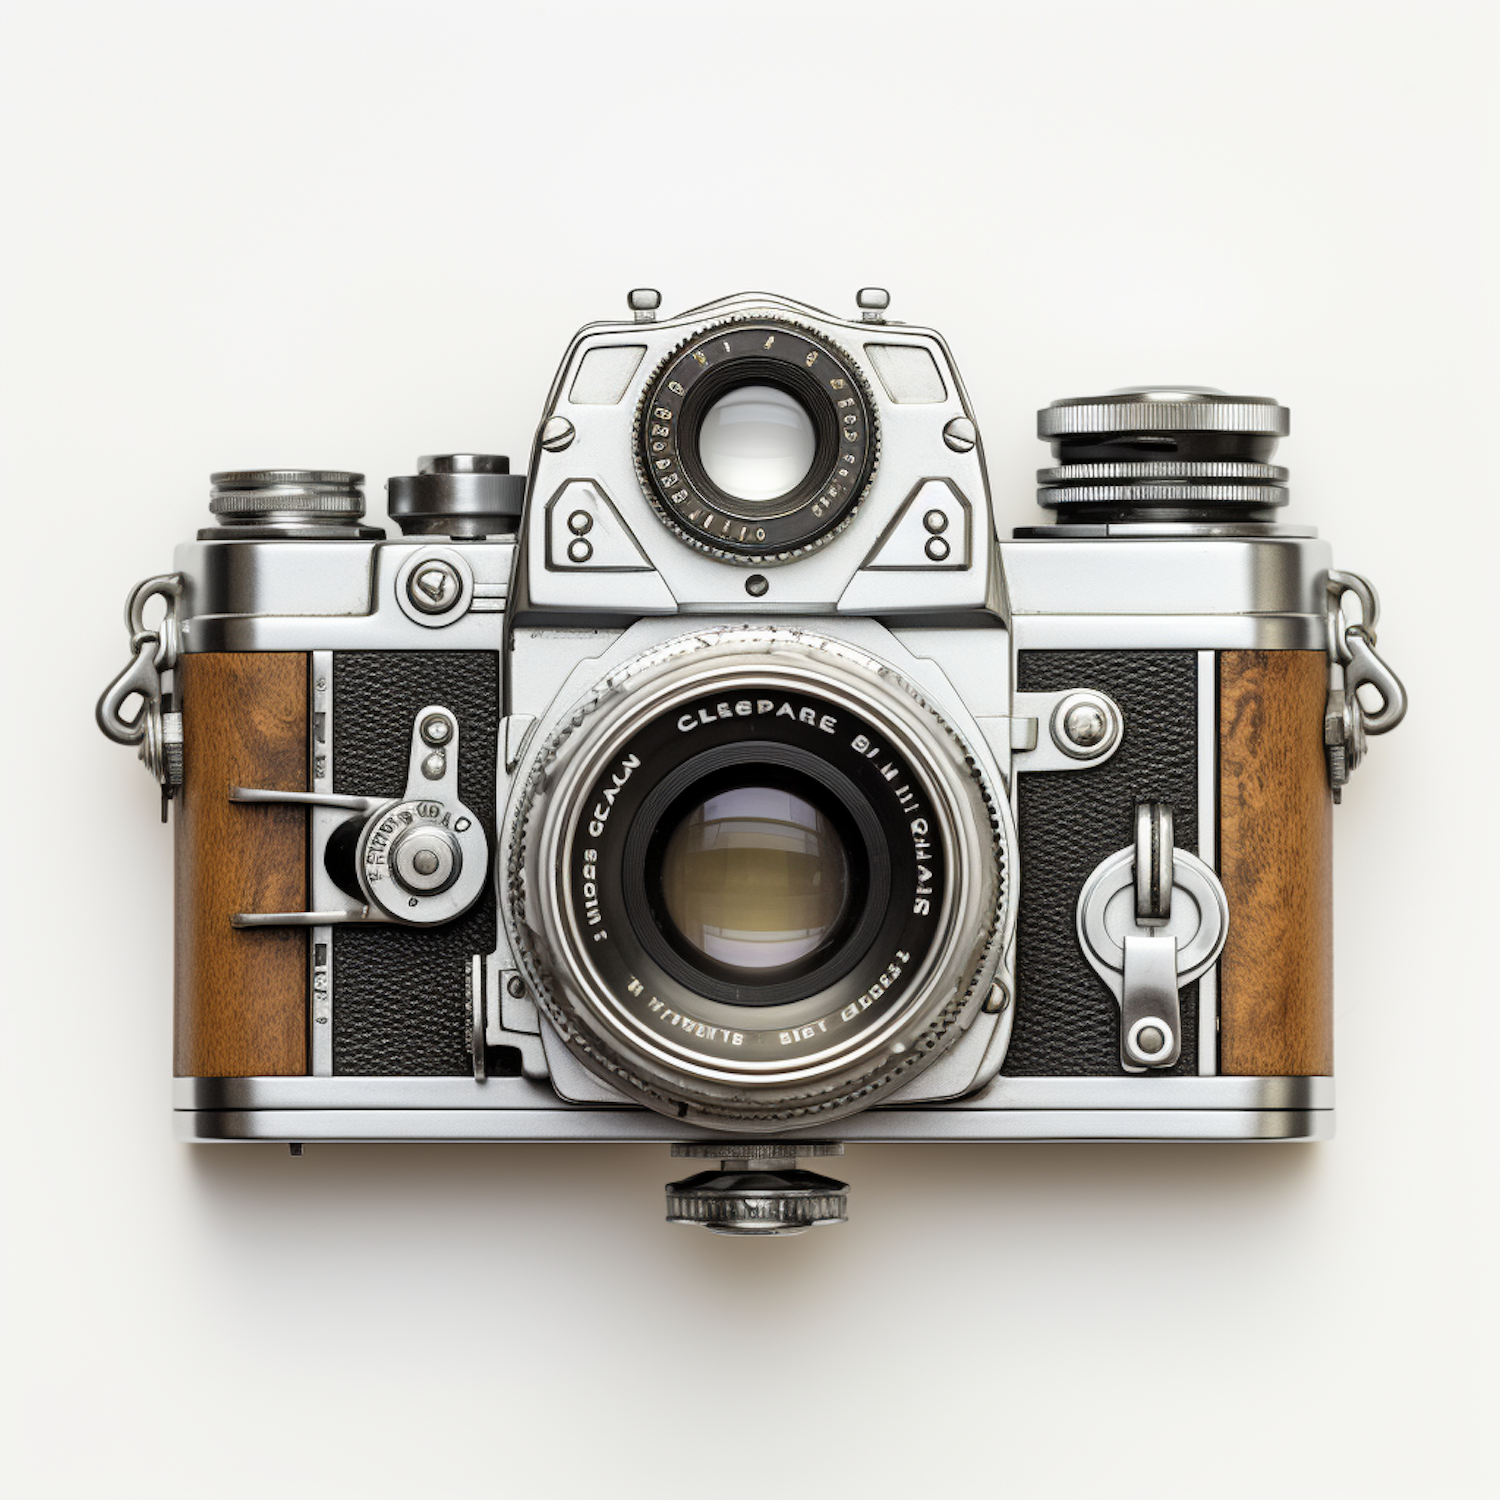 Elegant Vintage Camera with Silver and Wooden Accents